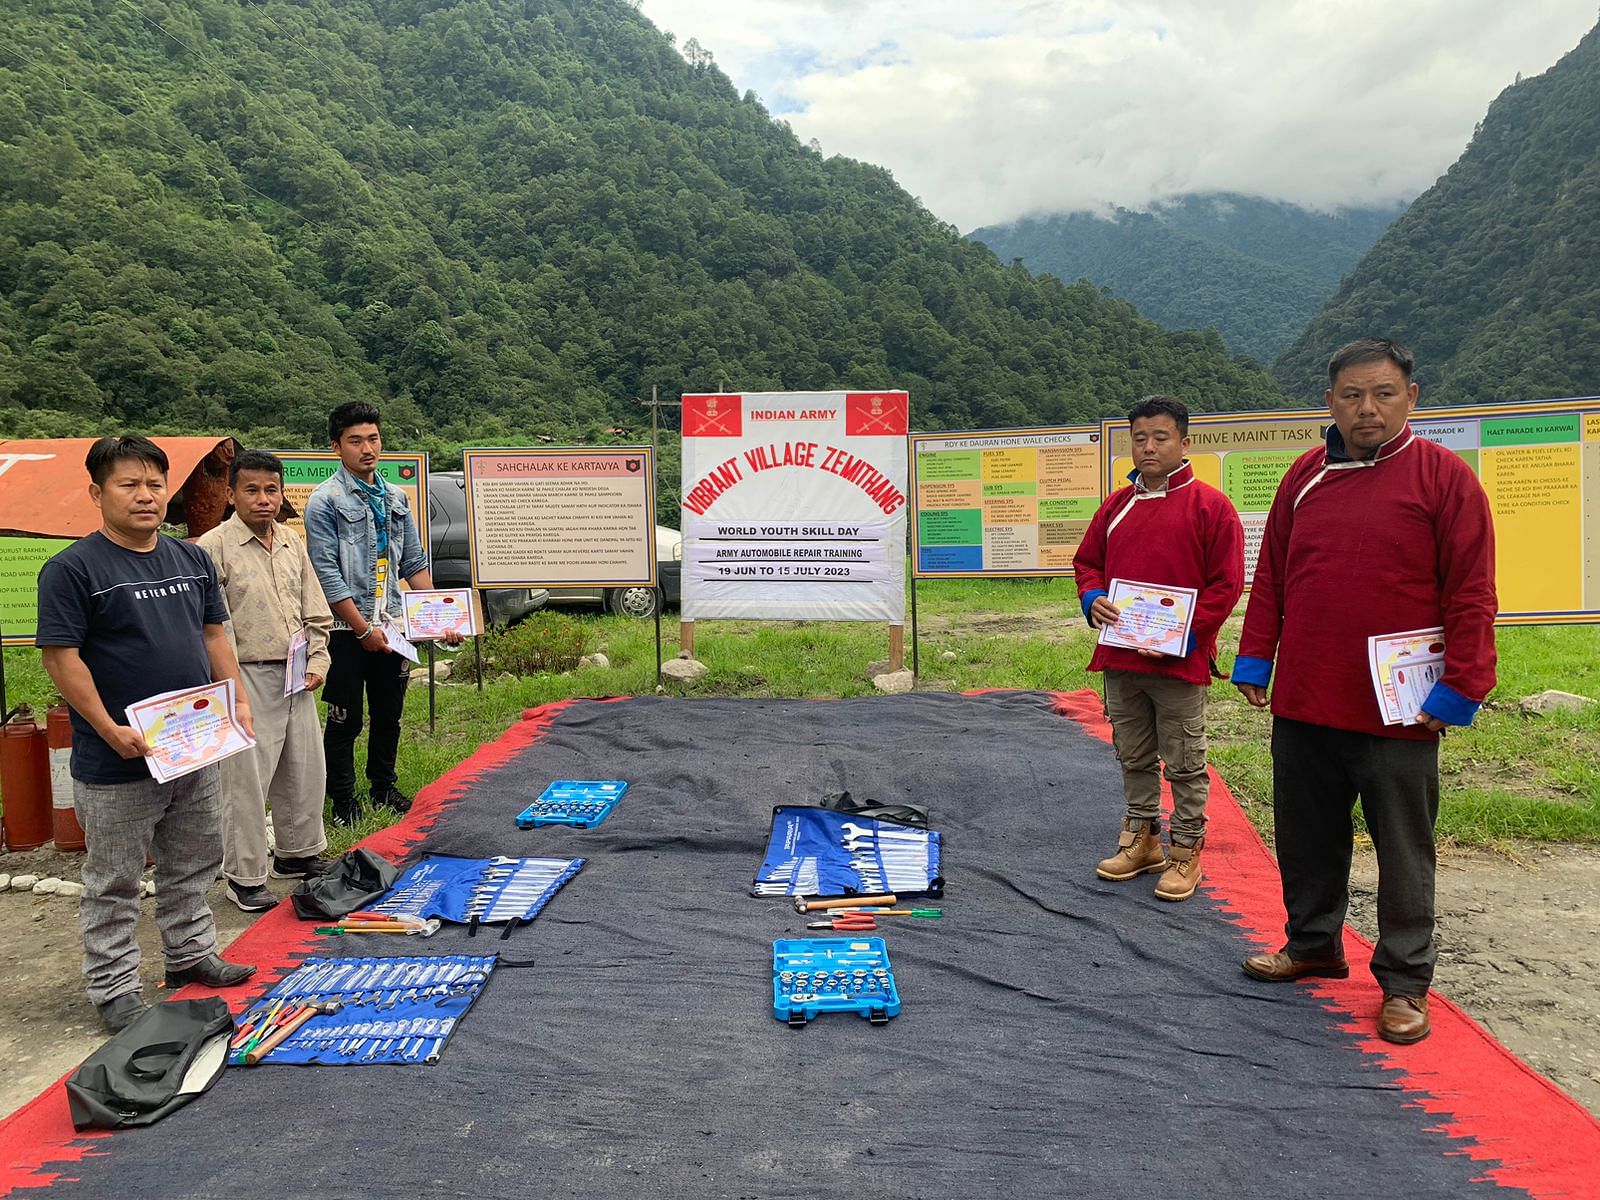 Zemithang residents attending the Automobile Repair Training Workshop conducted by Indian Army as part of Vibrant Village project | Karishma Hasnat, ThePrint